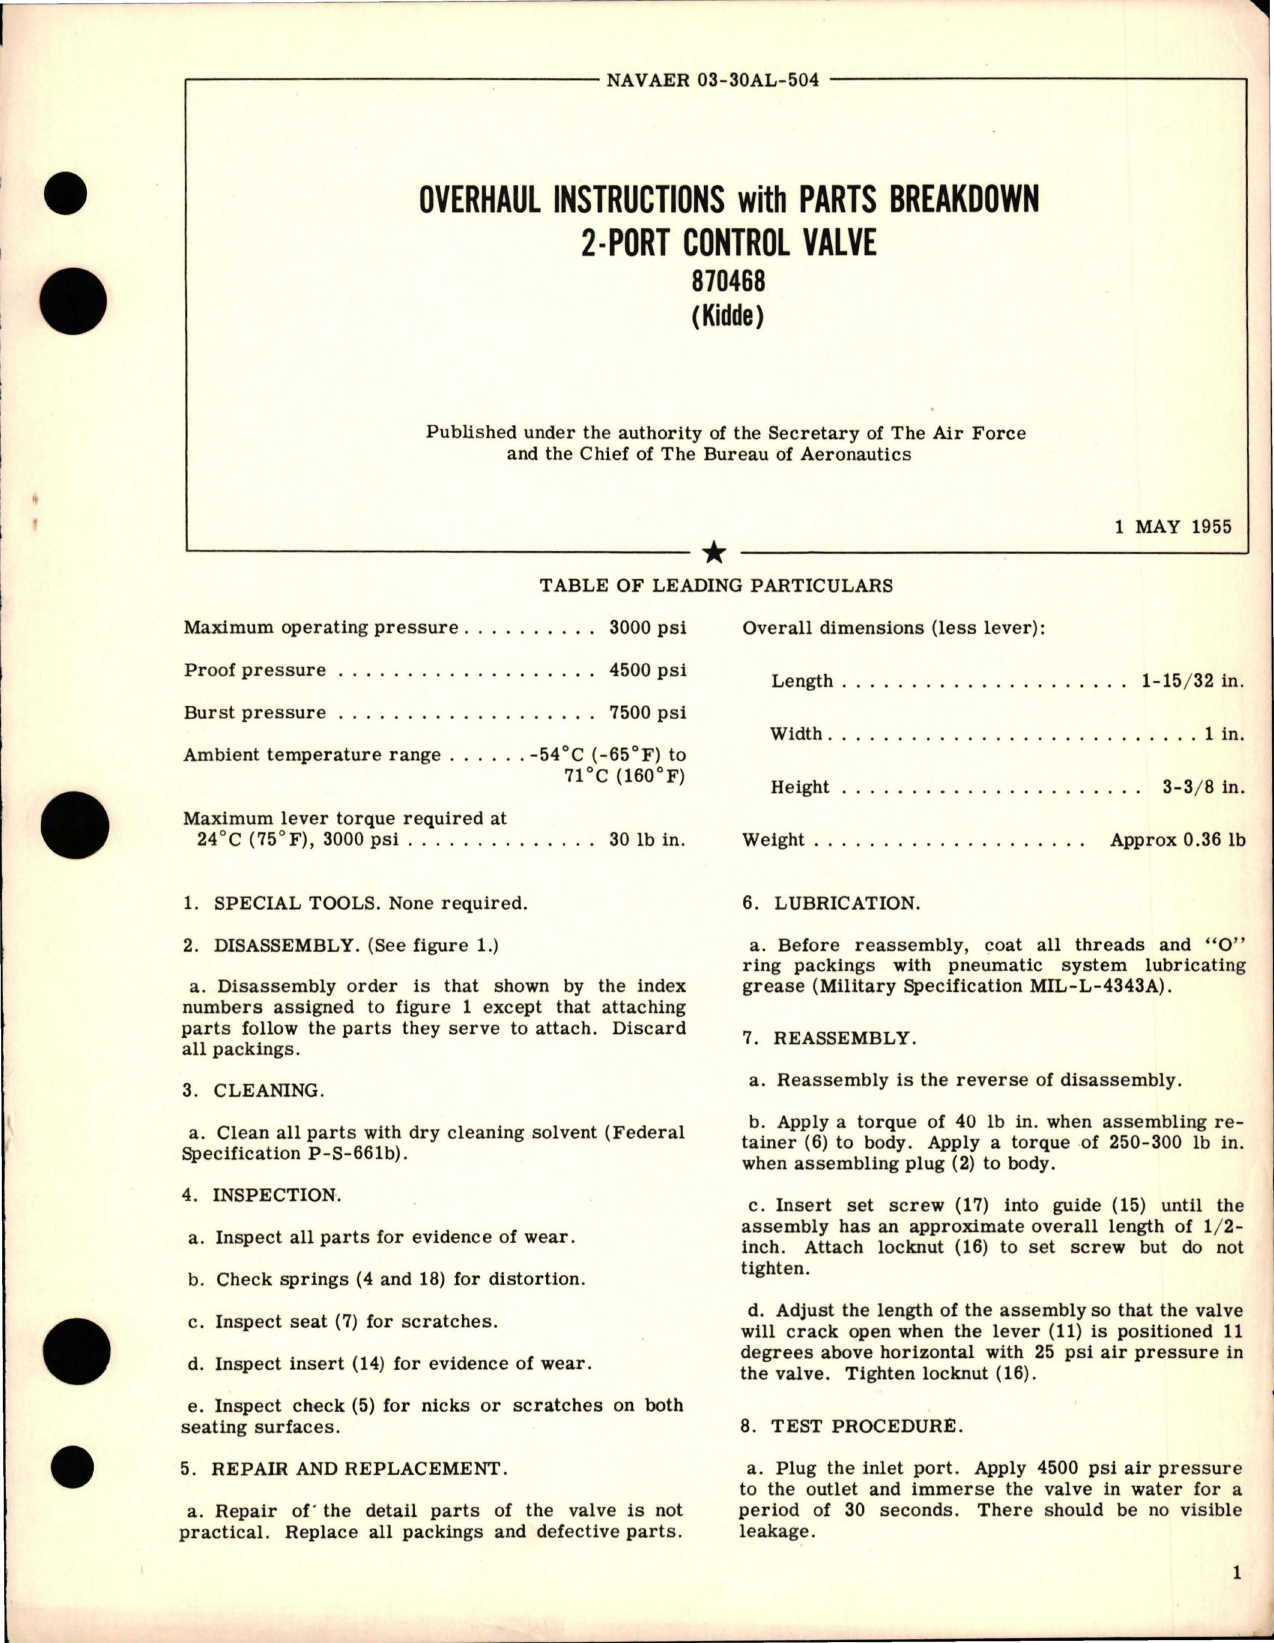 Sample page 1 from AirCorps Library document: Overhaul Instructions with Parts Breakdown for 2-Port Control Valve - 870468 